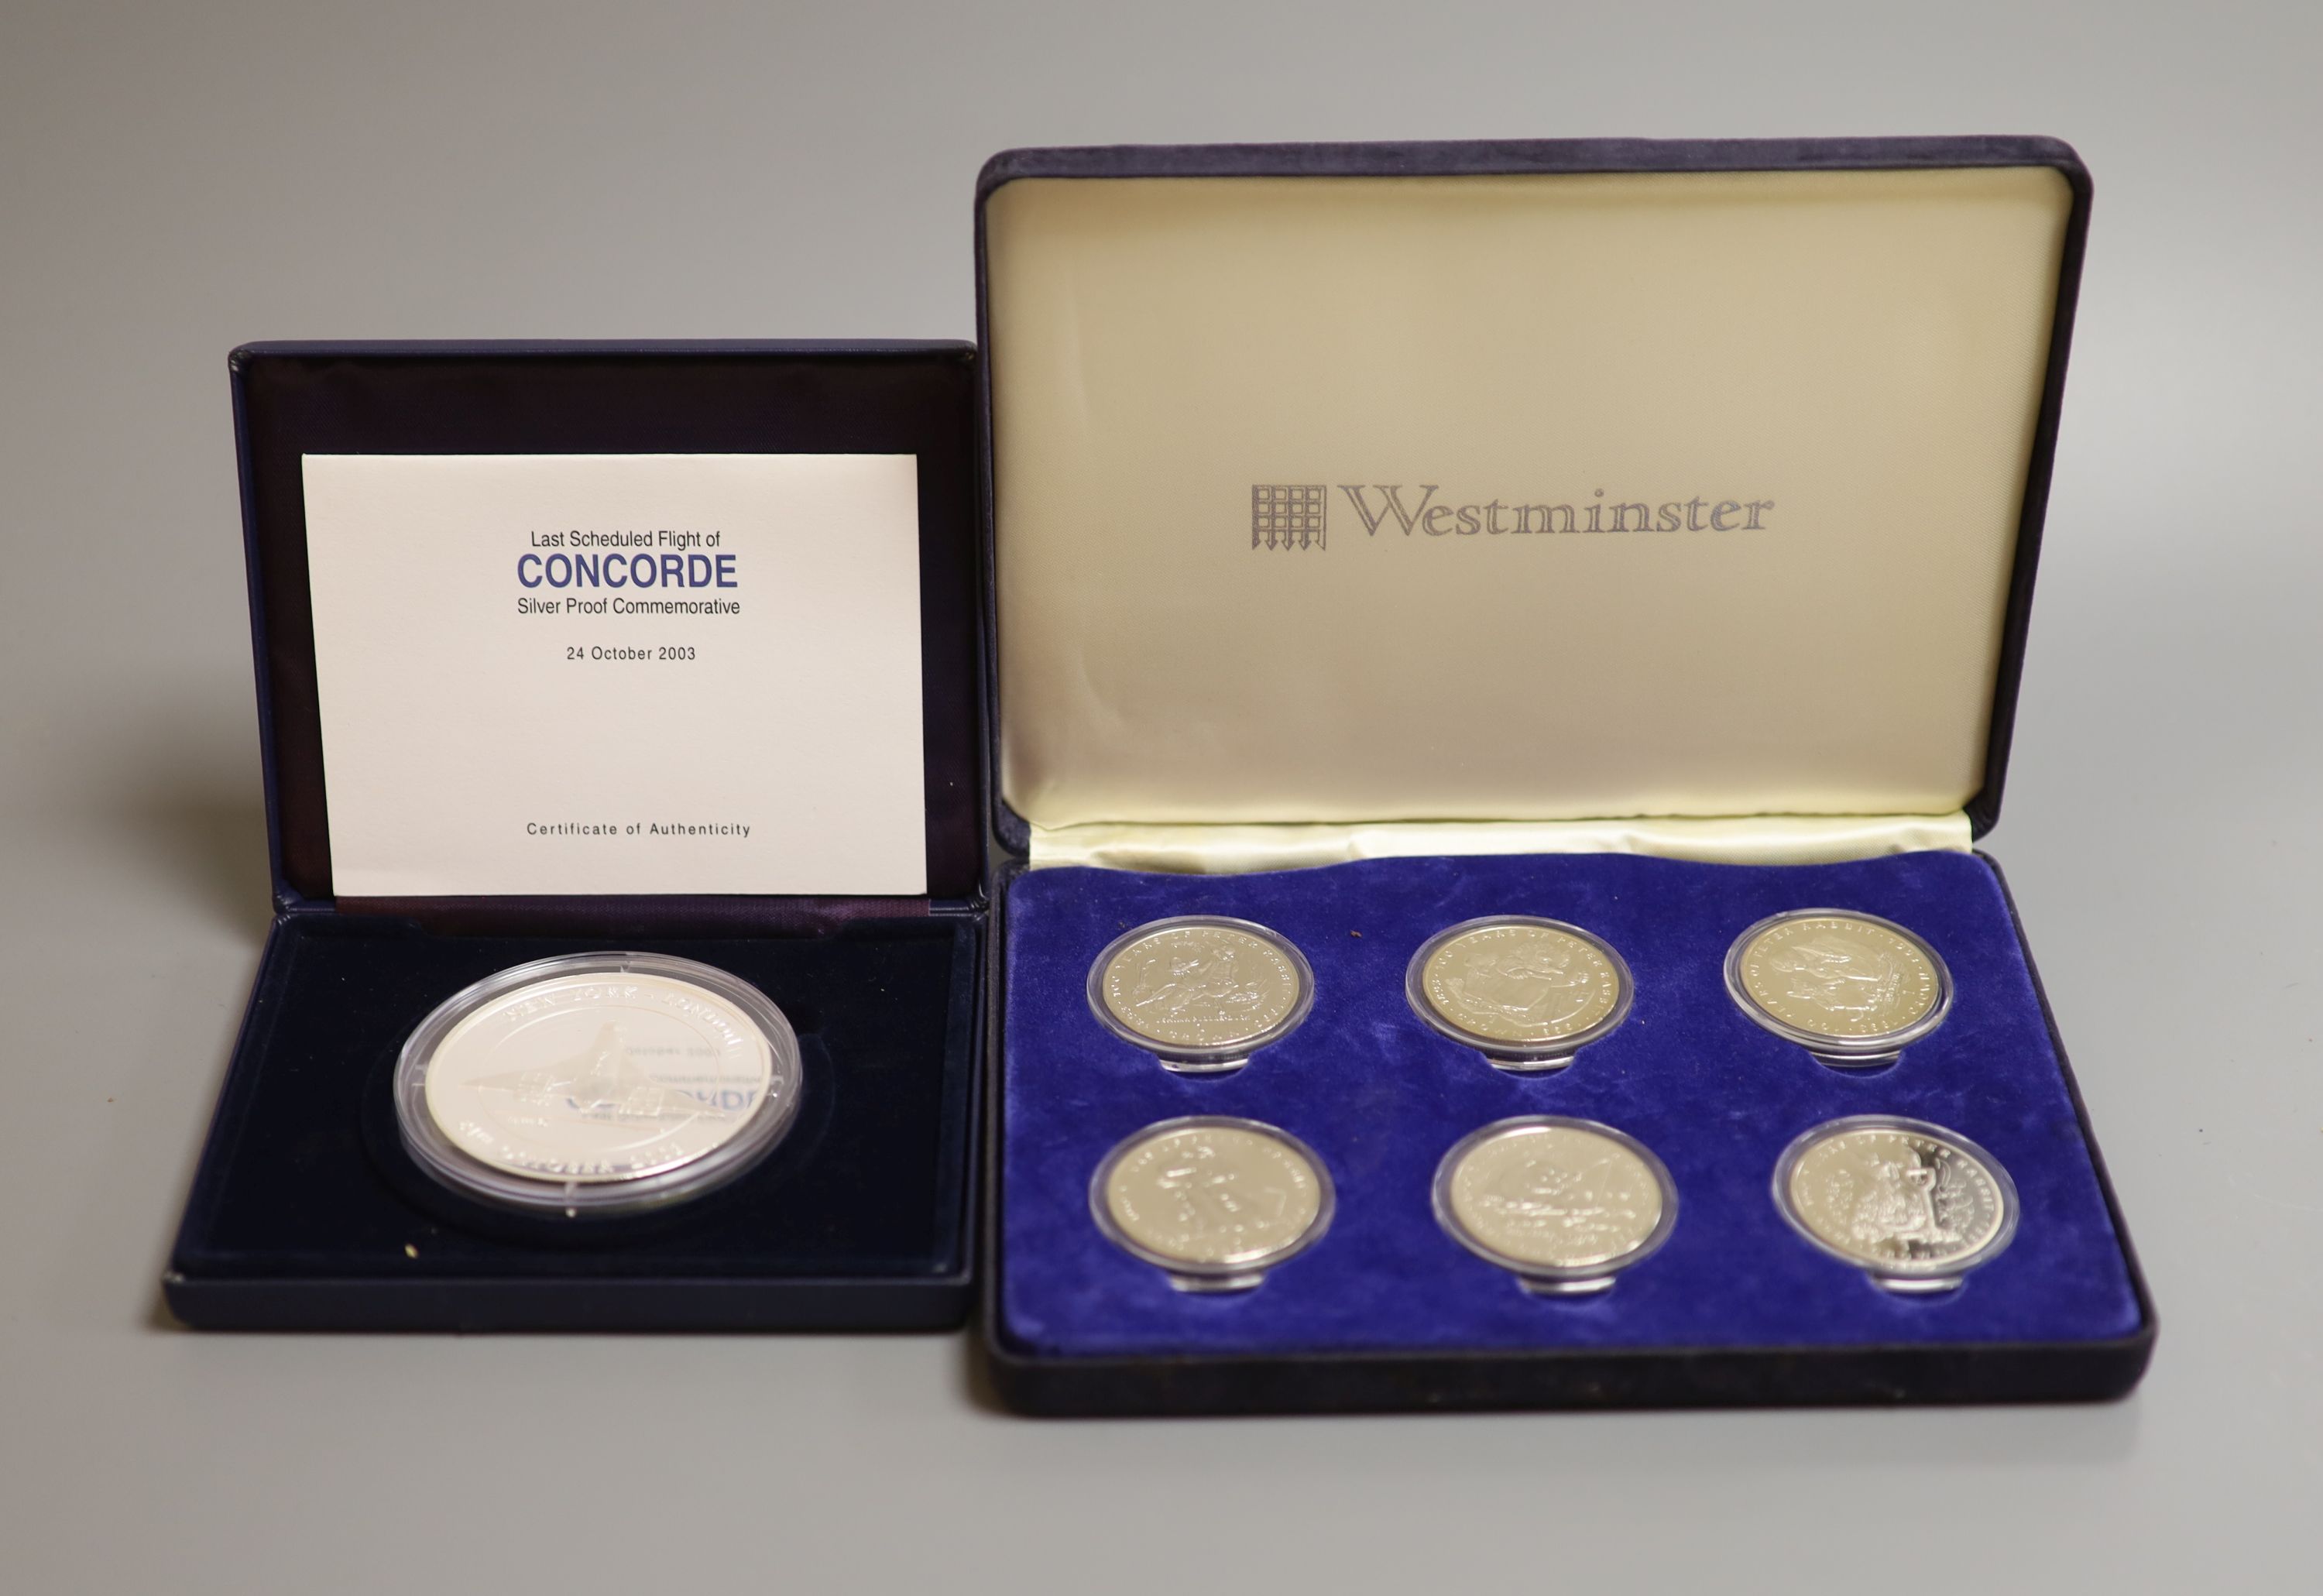 A Westminster 5 oz. proof silver concorde commemorative coin, 2003 and A Westminster the Beatrix Potter coin collection comprising six crowns 1993